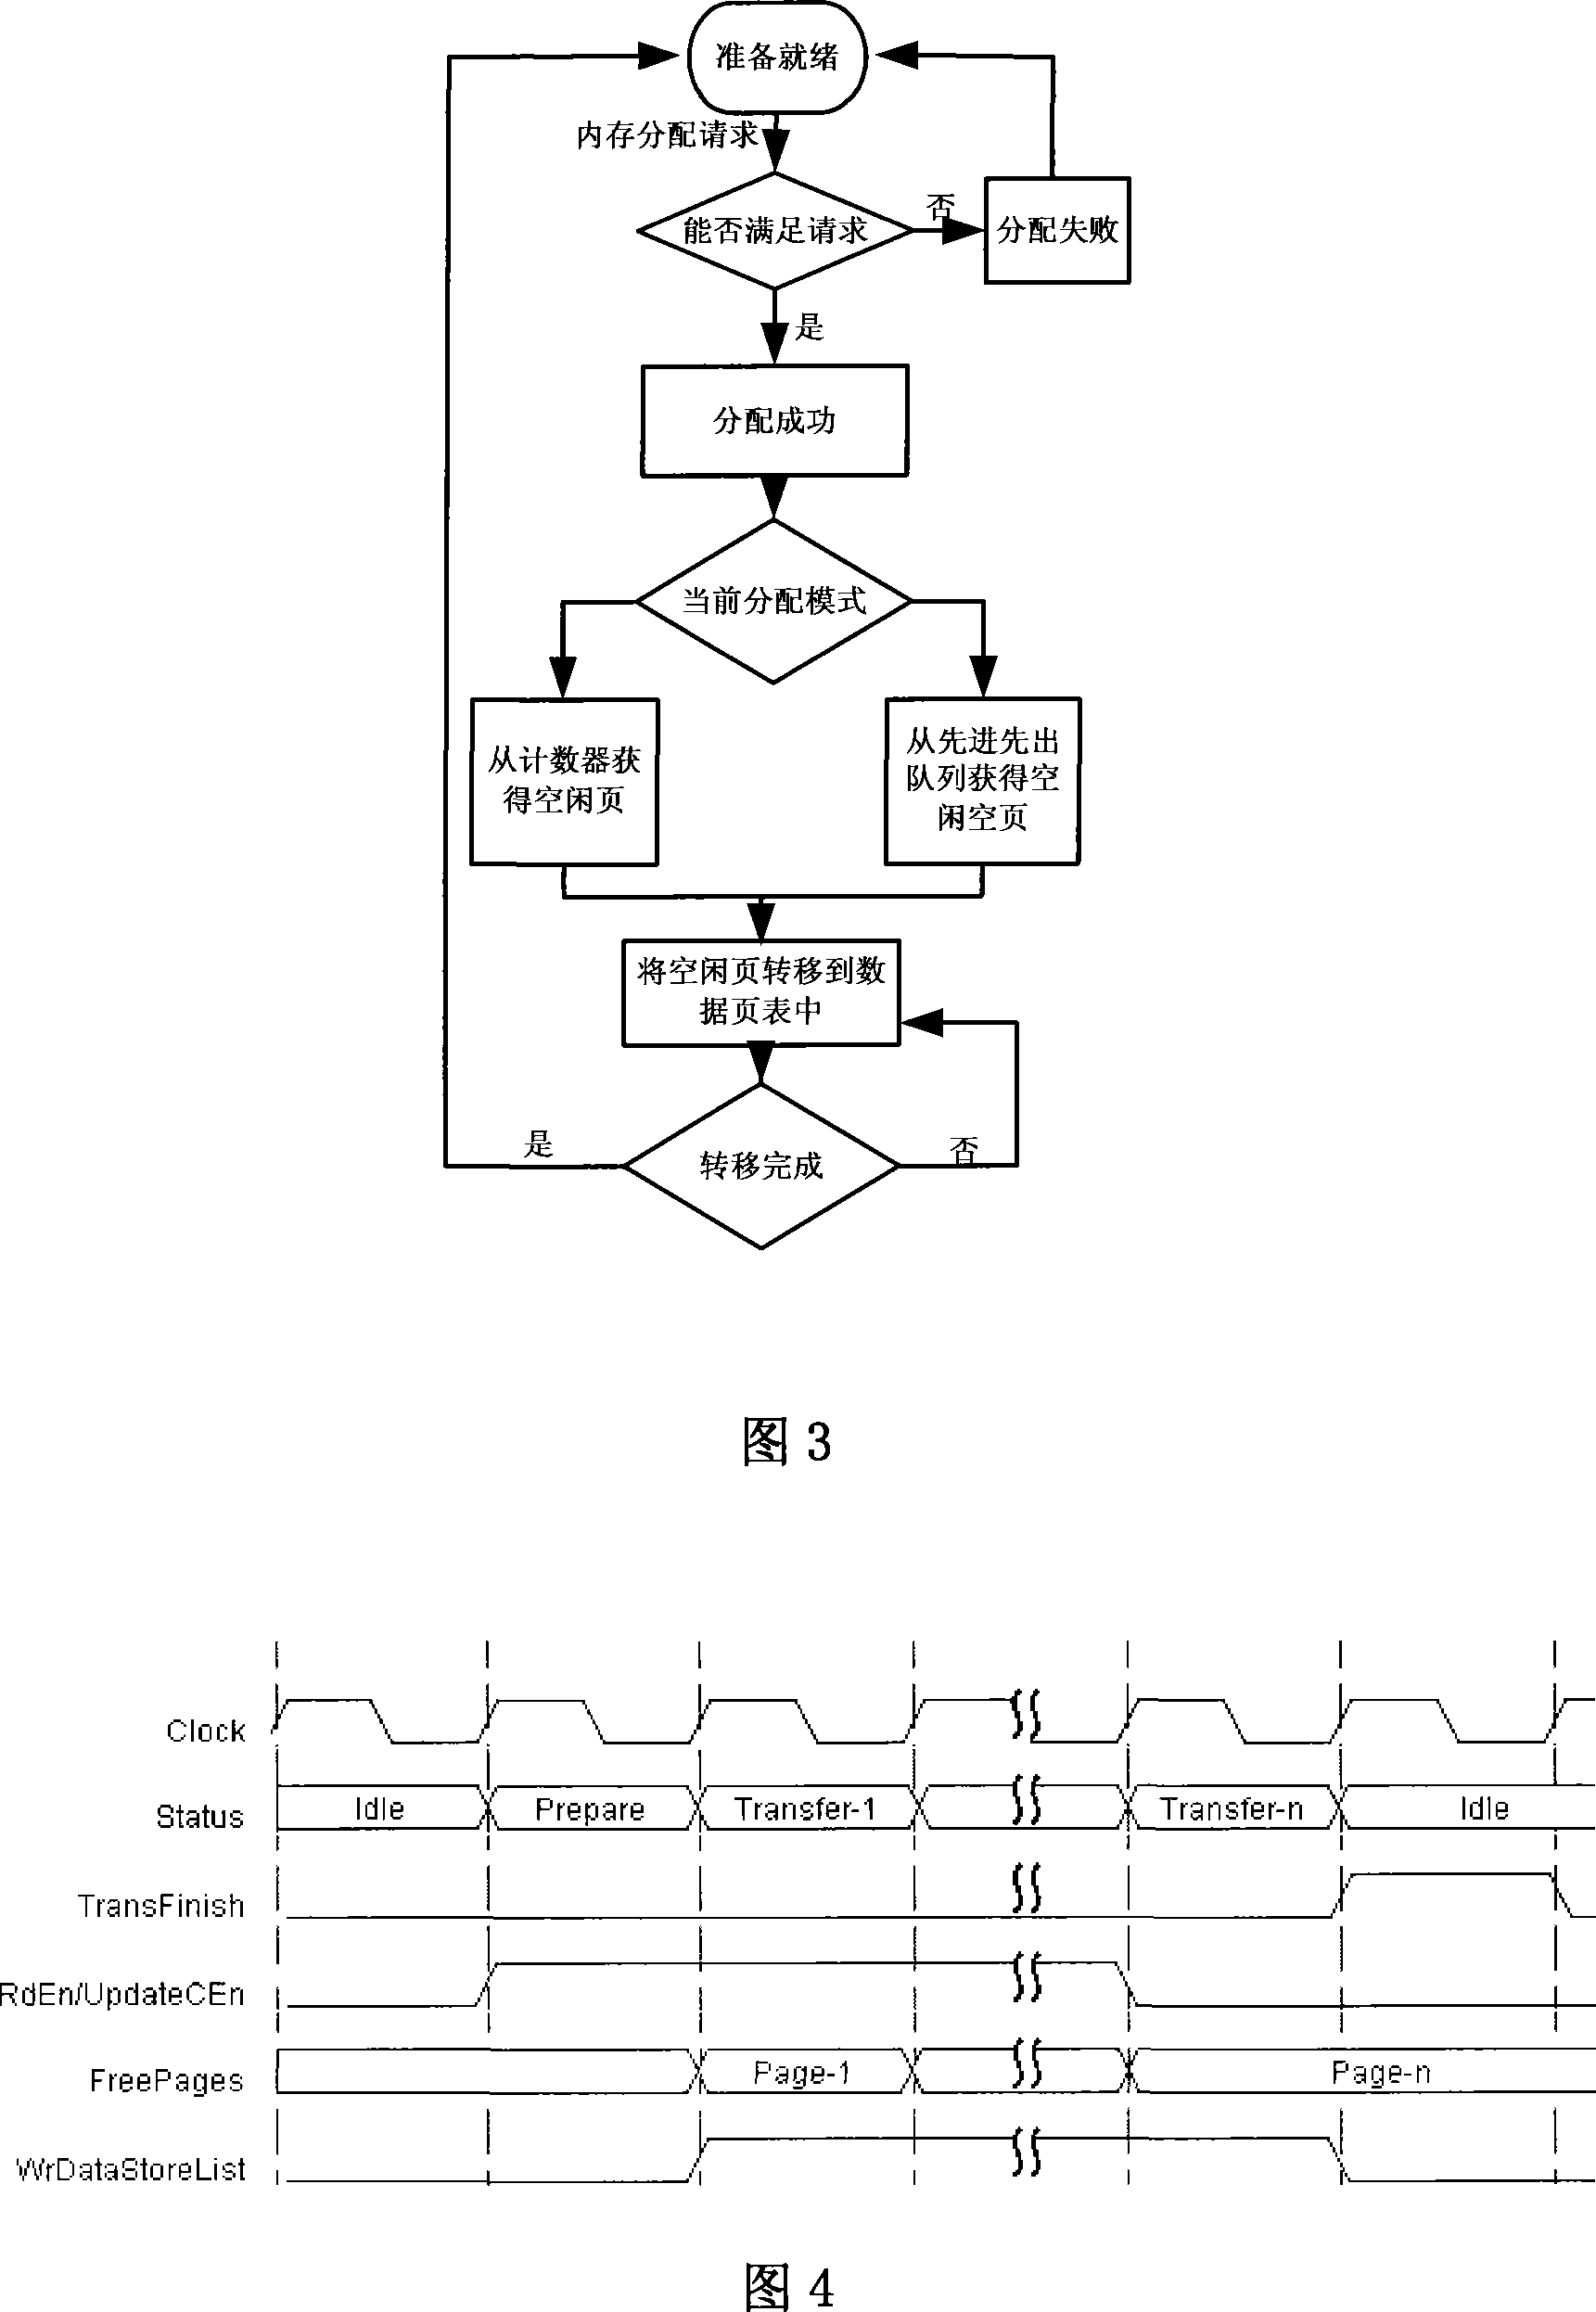 Method for managing dynamic internal memory base on discontinuous page